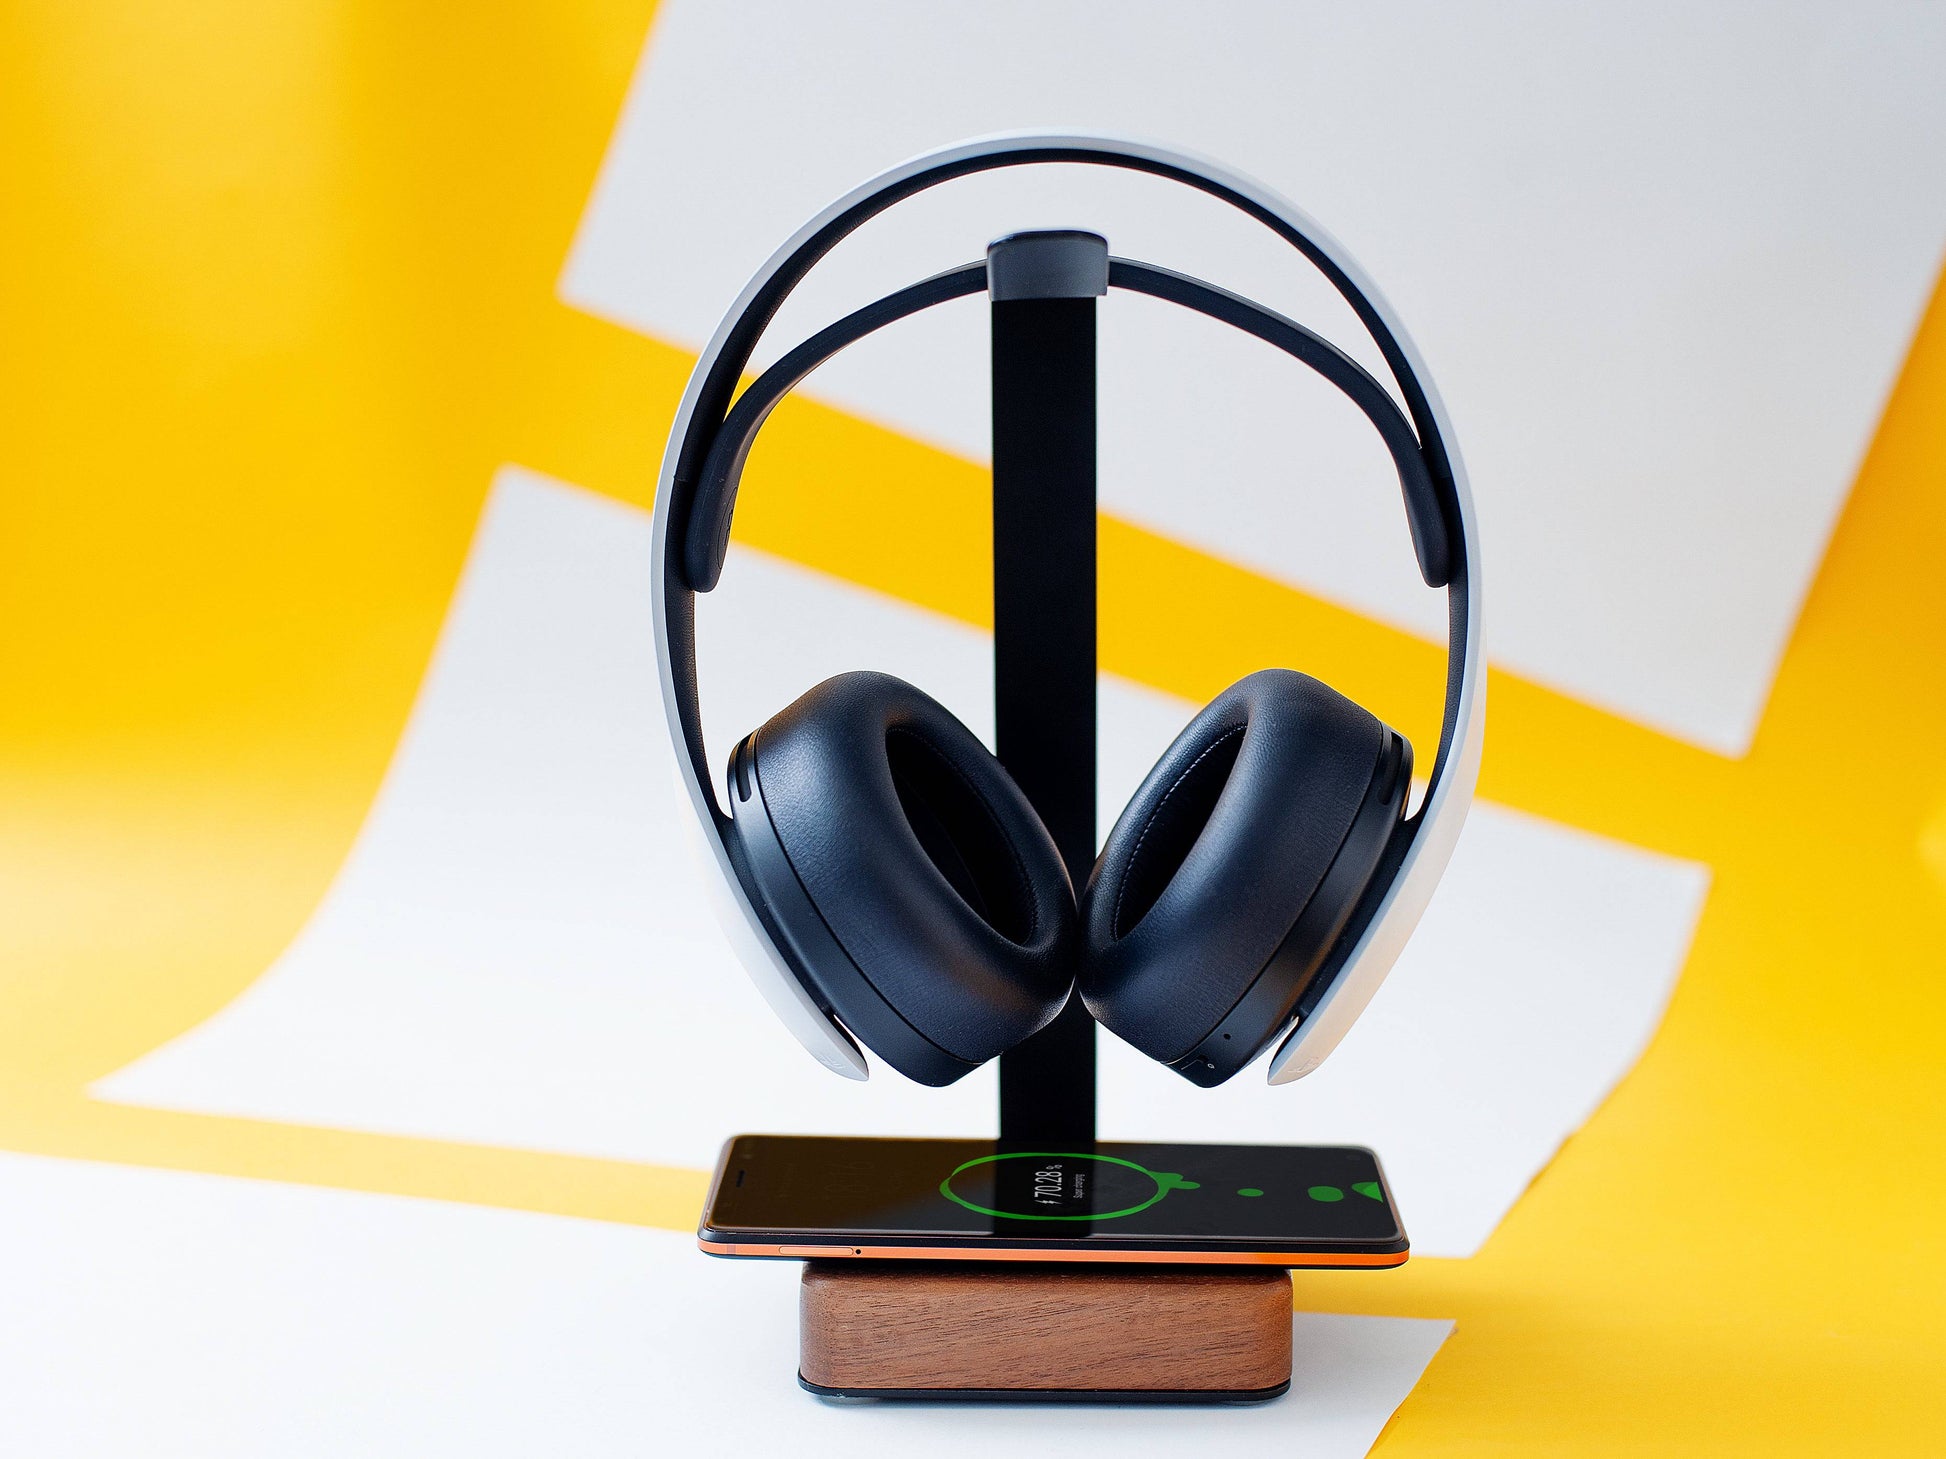 Wooden Headphone Stand